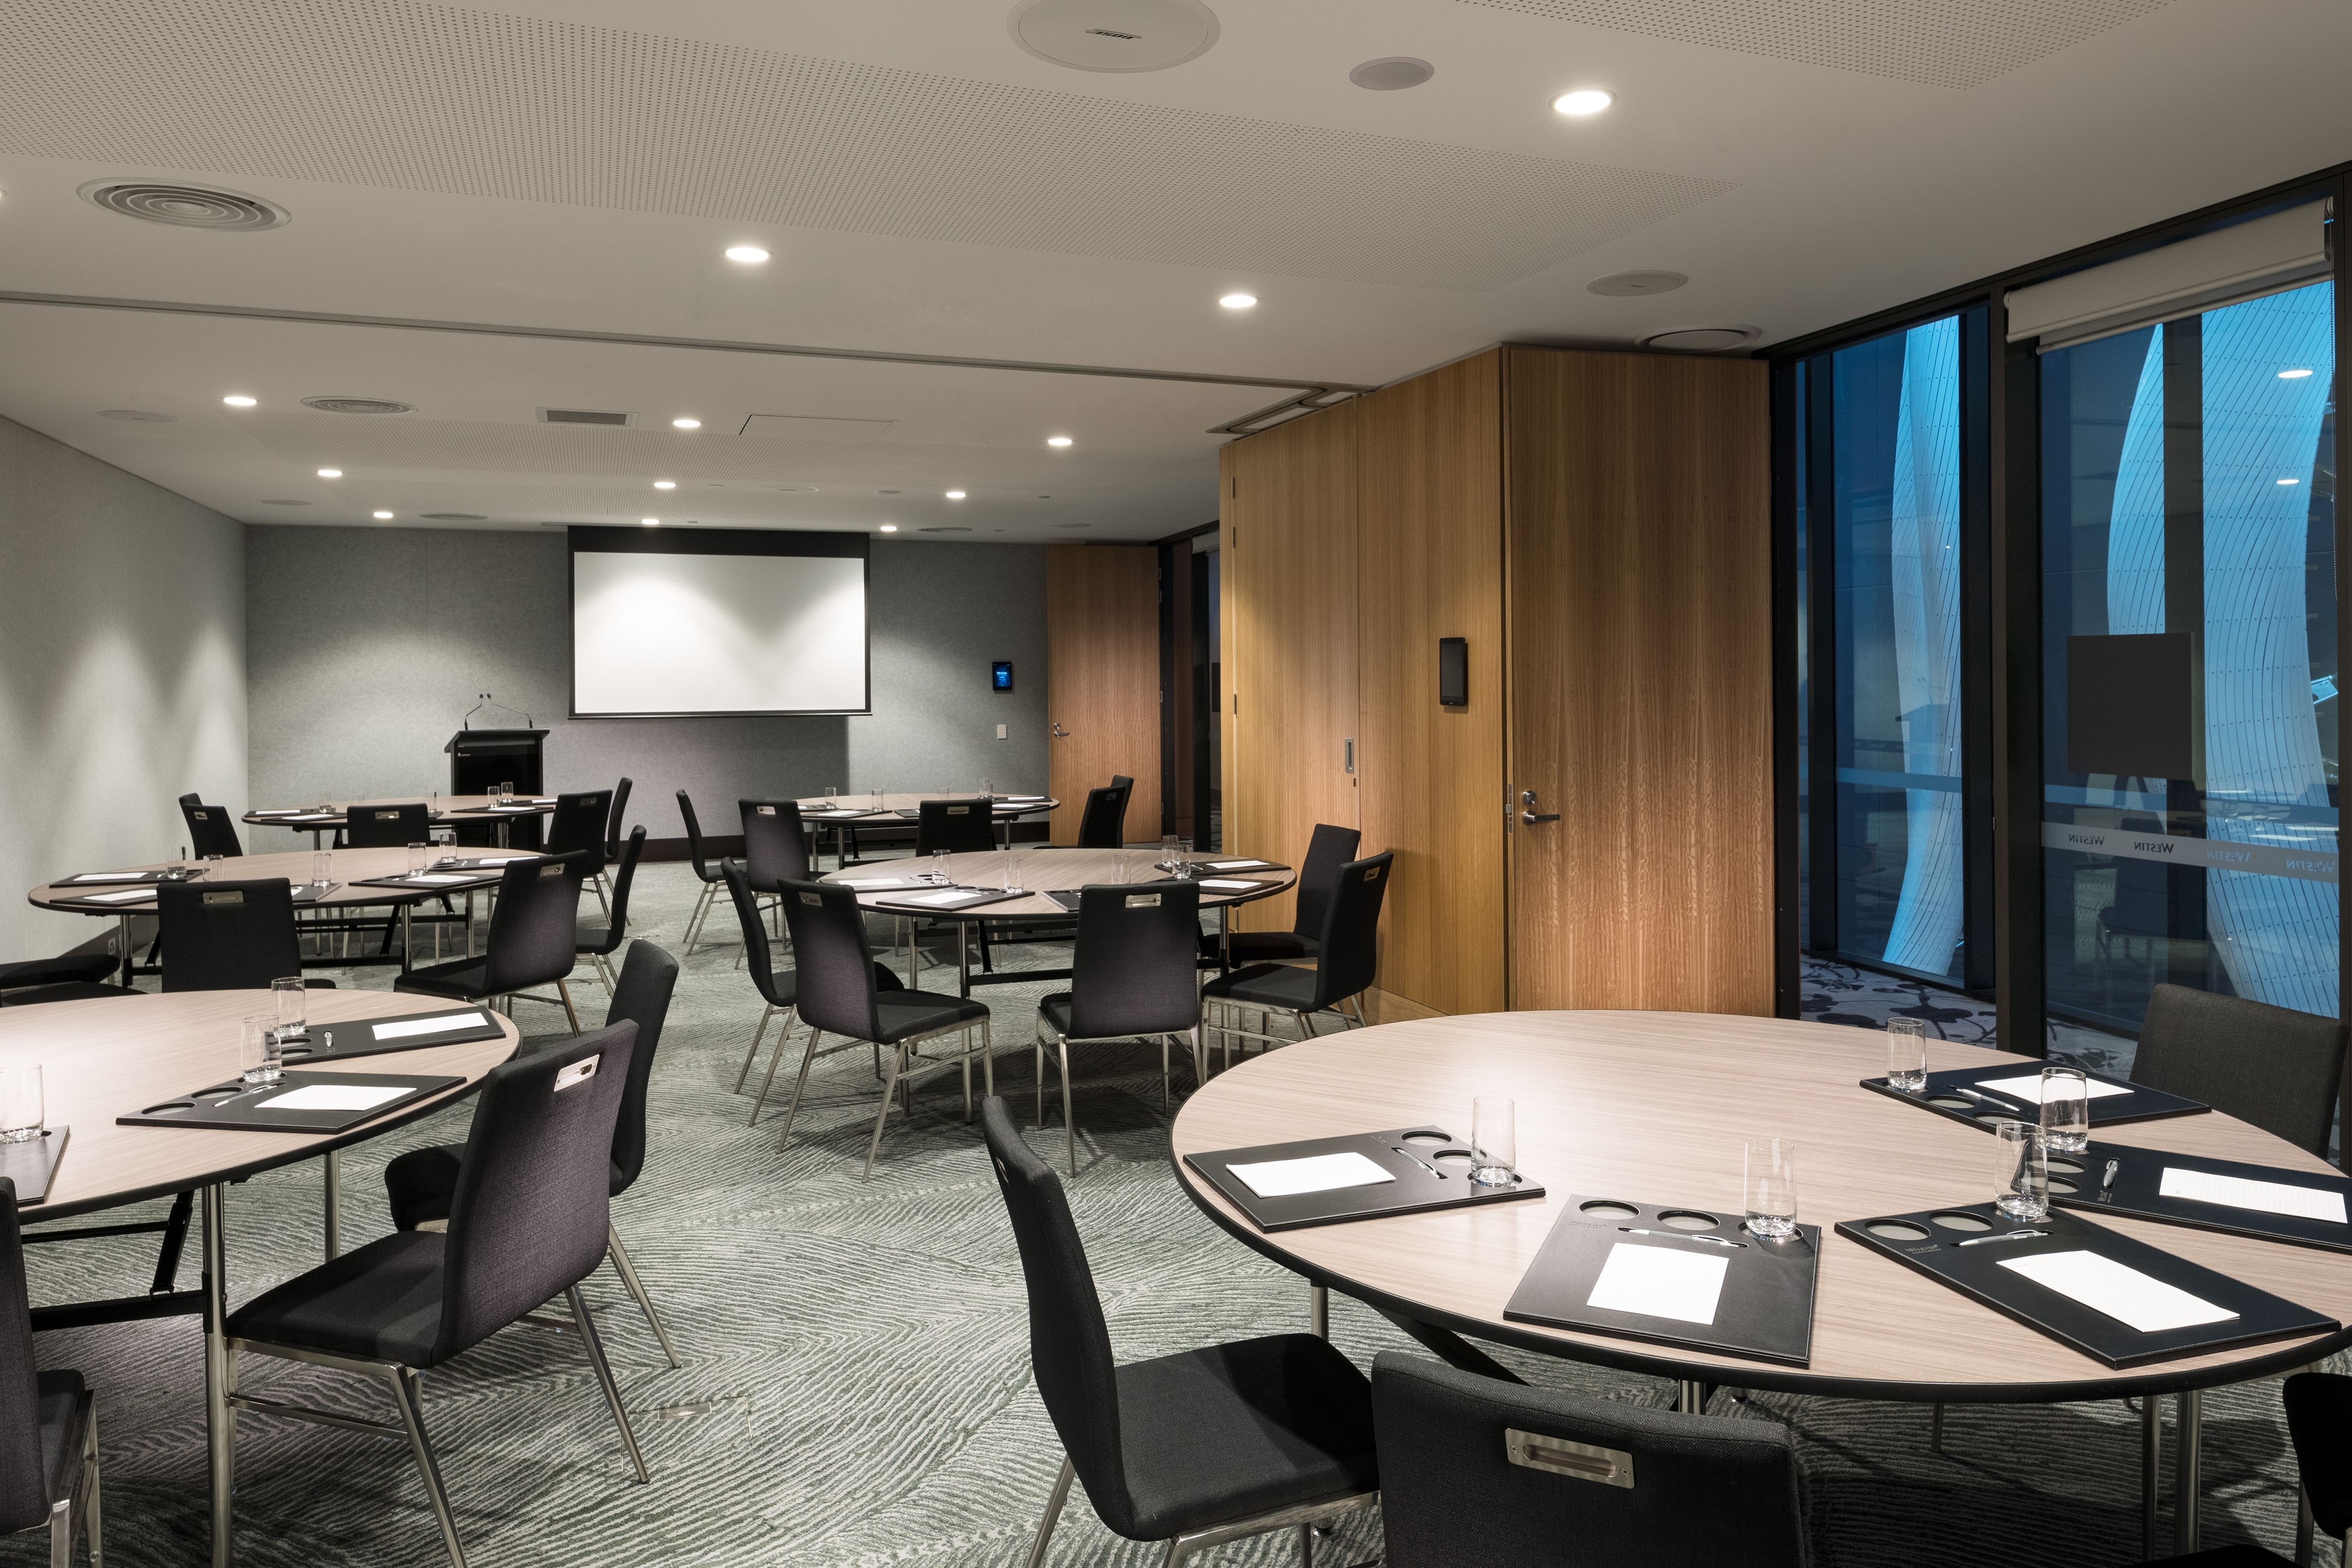 Meeting room with round tables and a projector screen